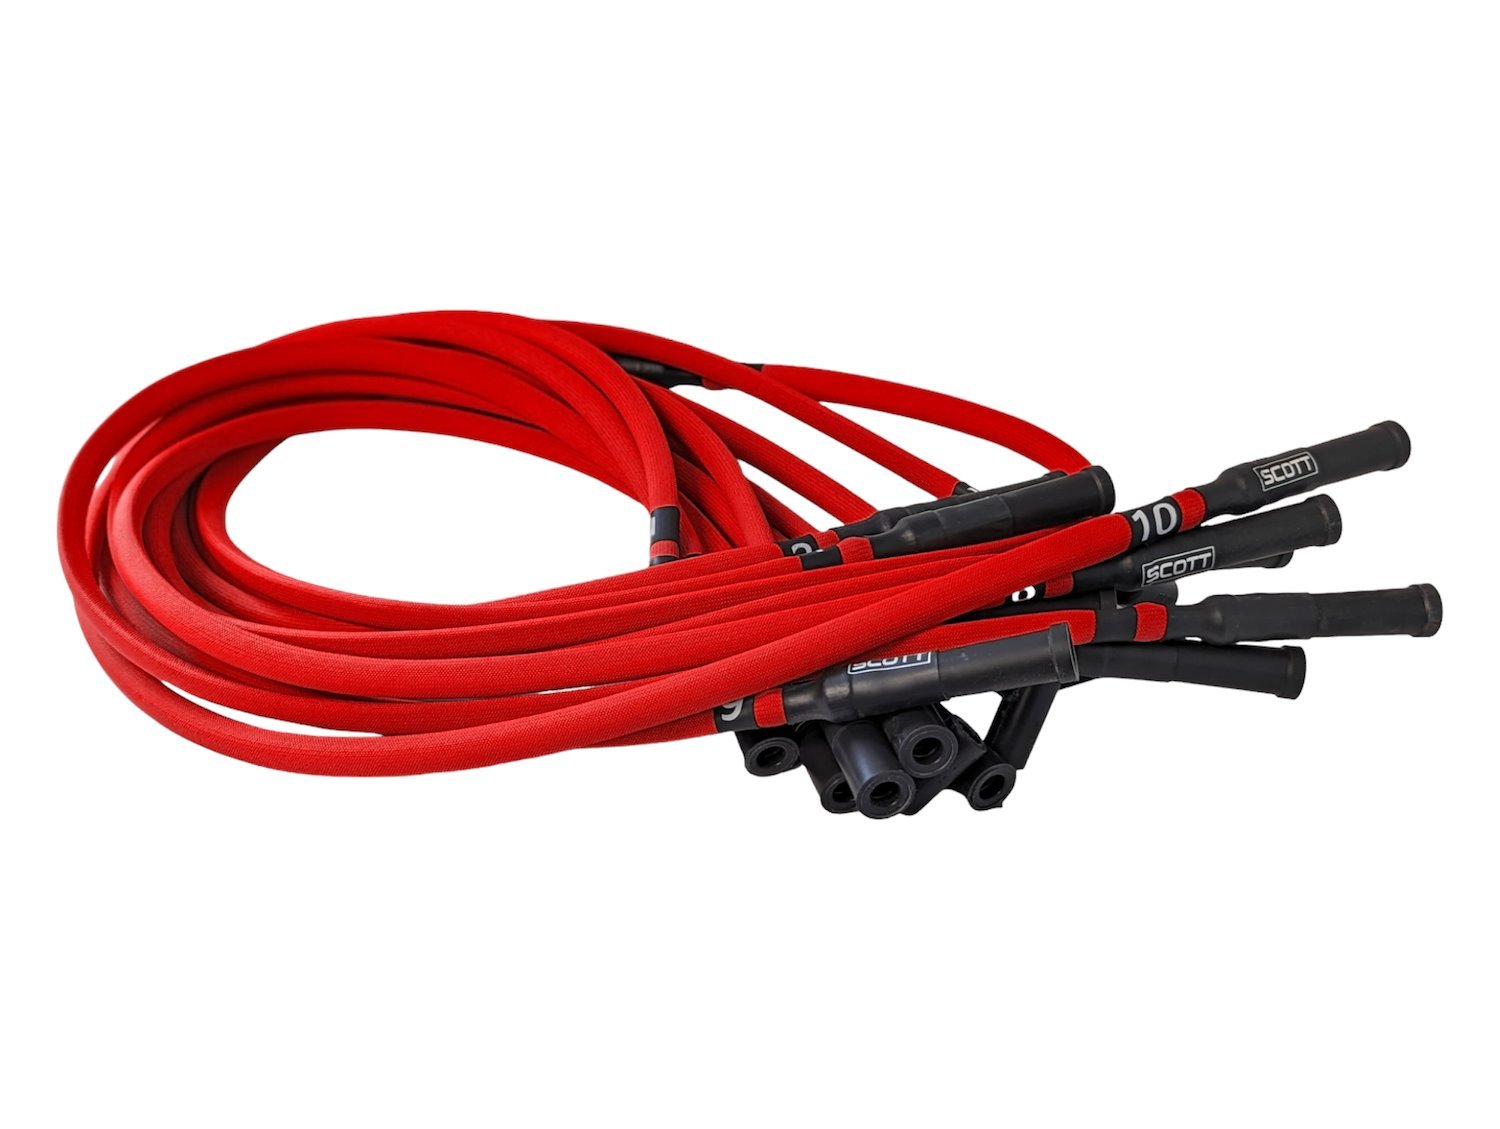 SPW300-PS-690-III-2 Super Mag Fiberglass-Oversleeved Spark Plug Wire Set for Dodge Viper (Gen3) [Red]